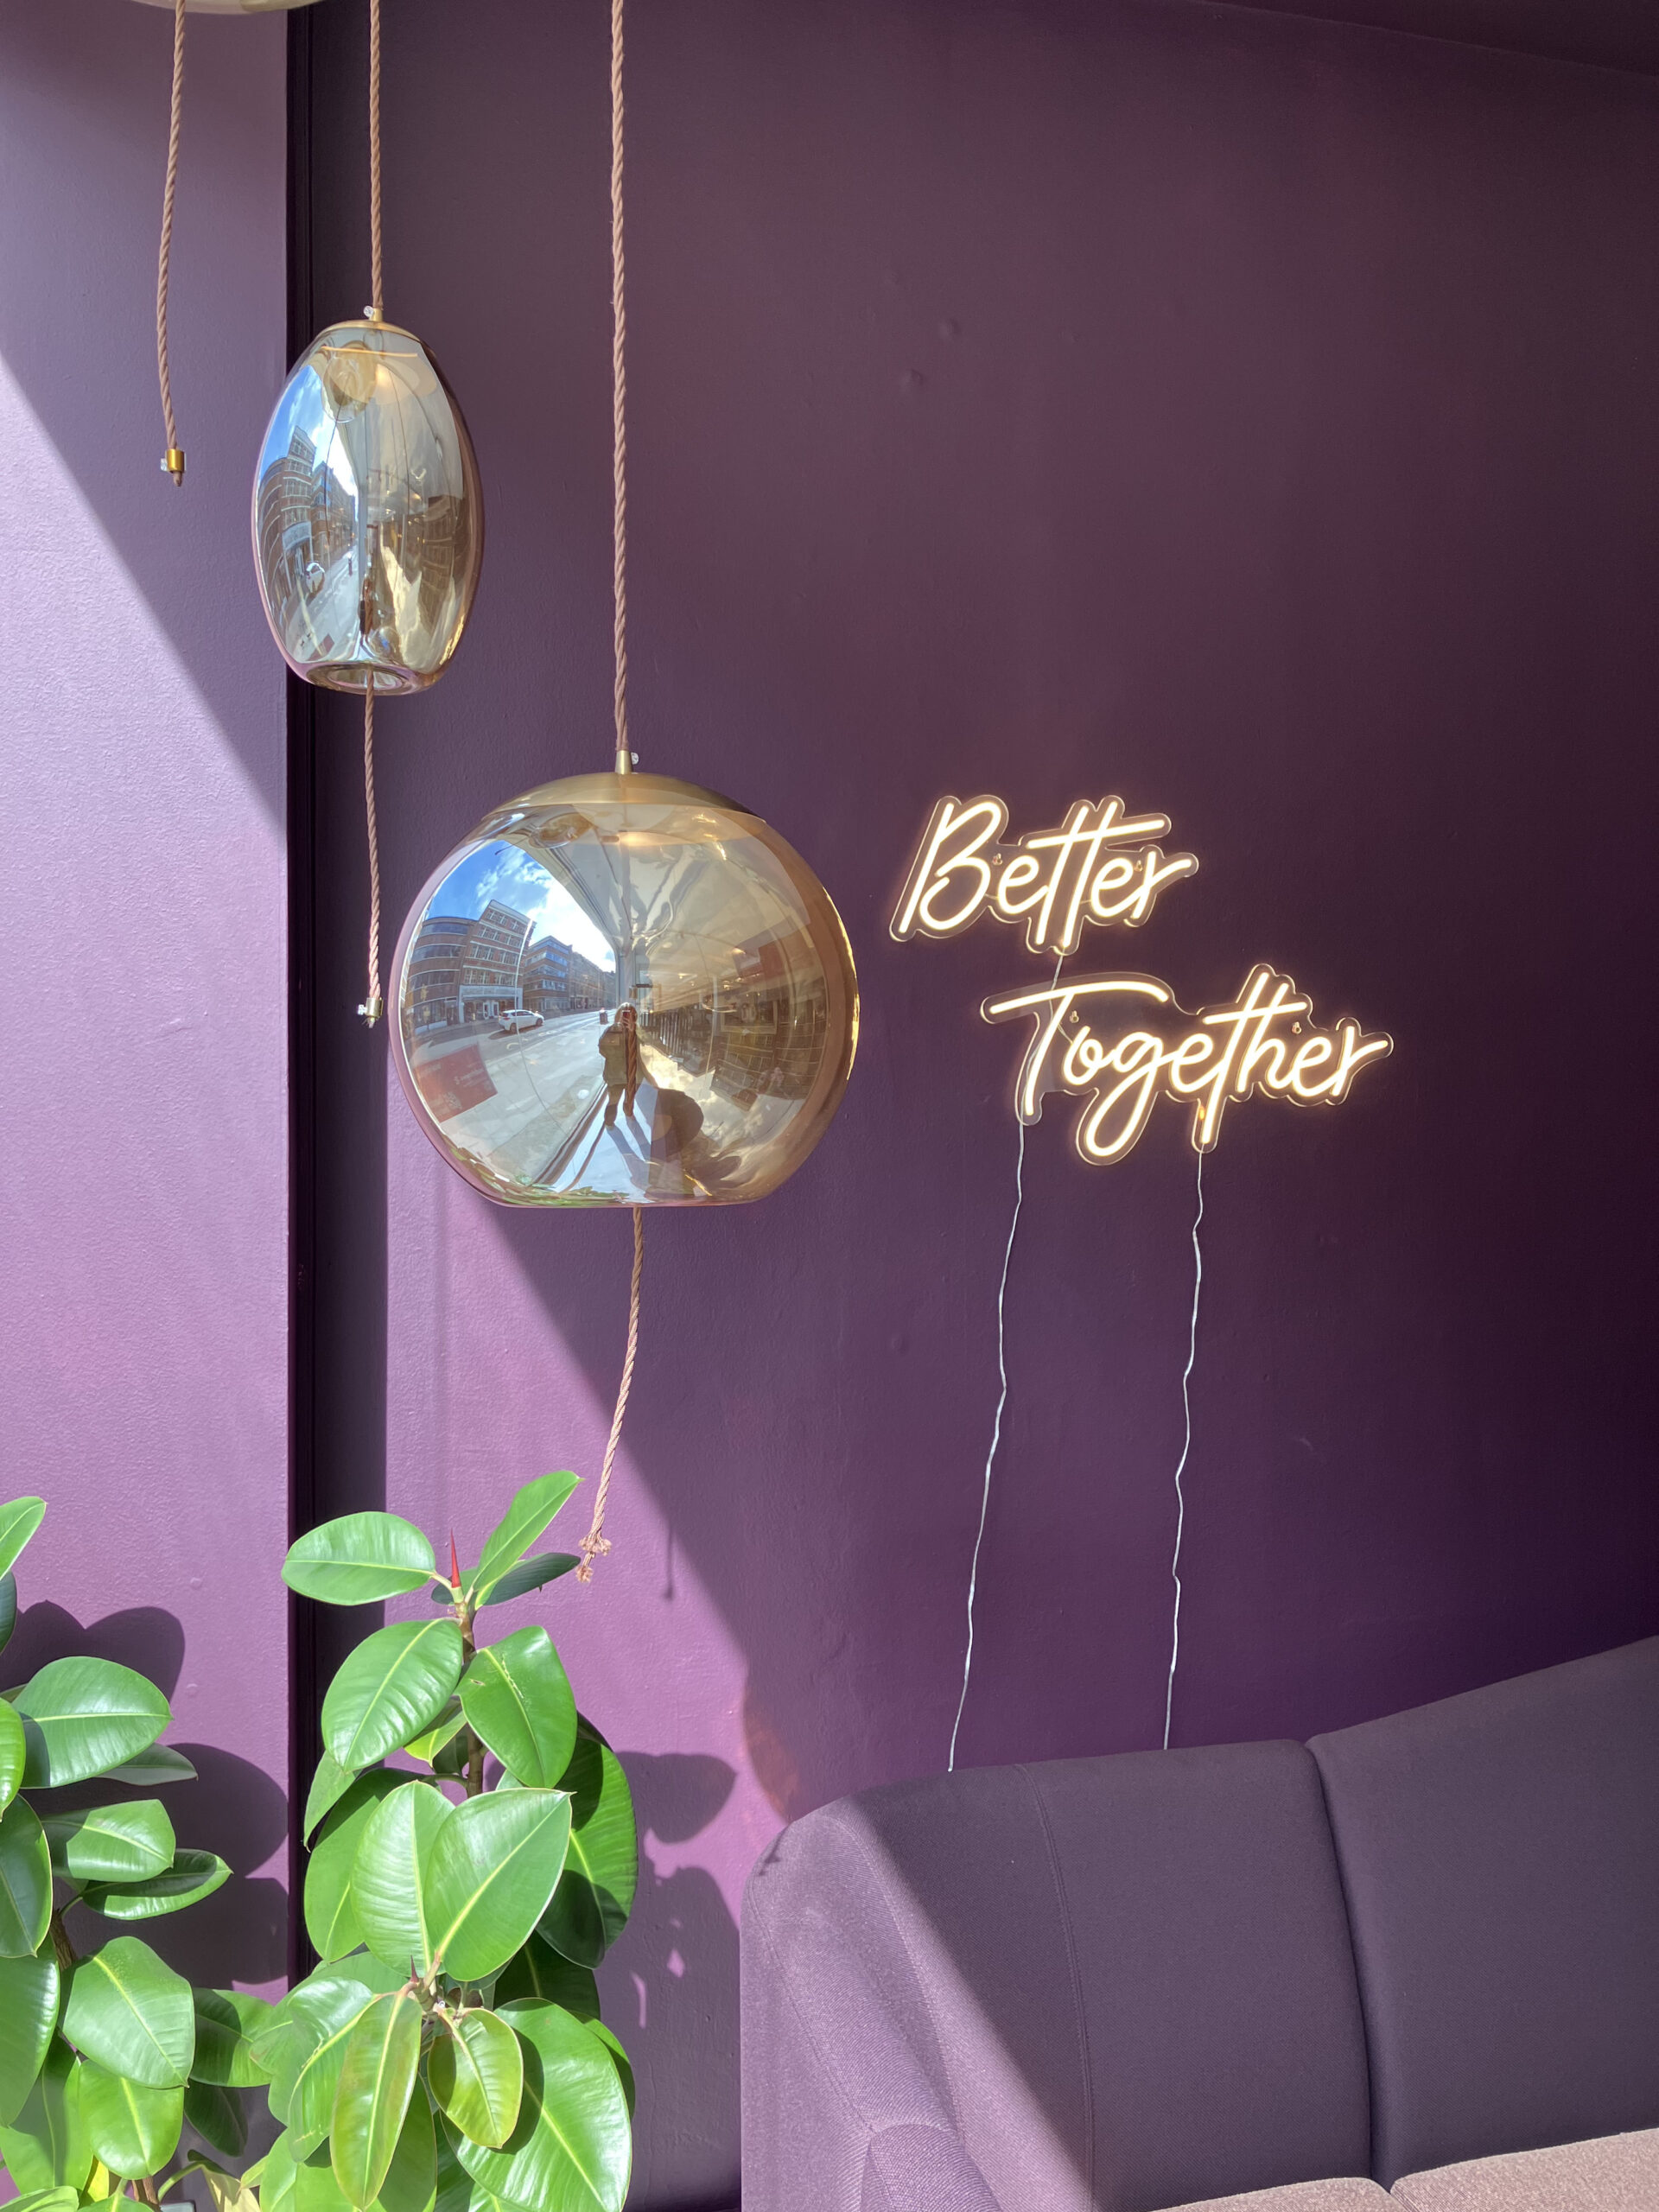 Brand Identity at our London Showroom. A room with a purple couch and a neon sign that says better together.